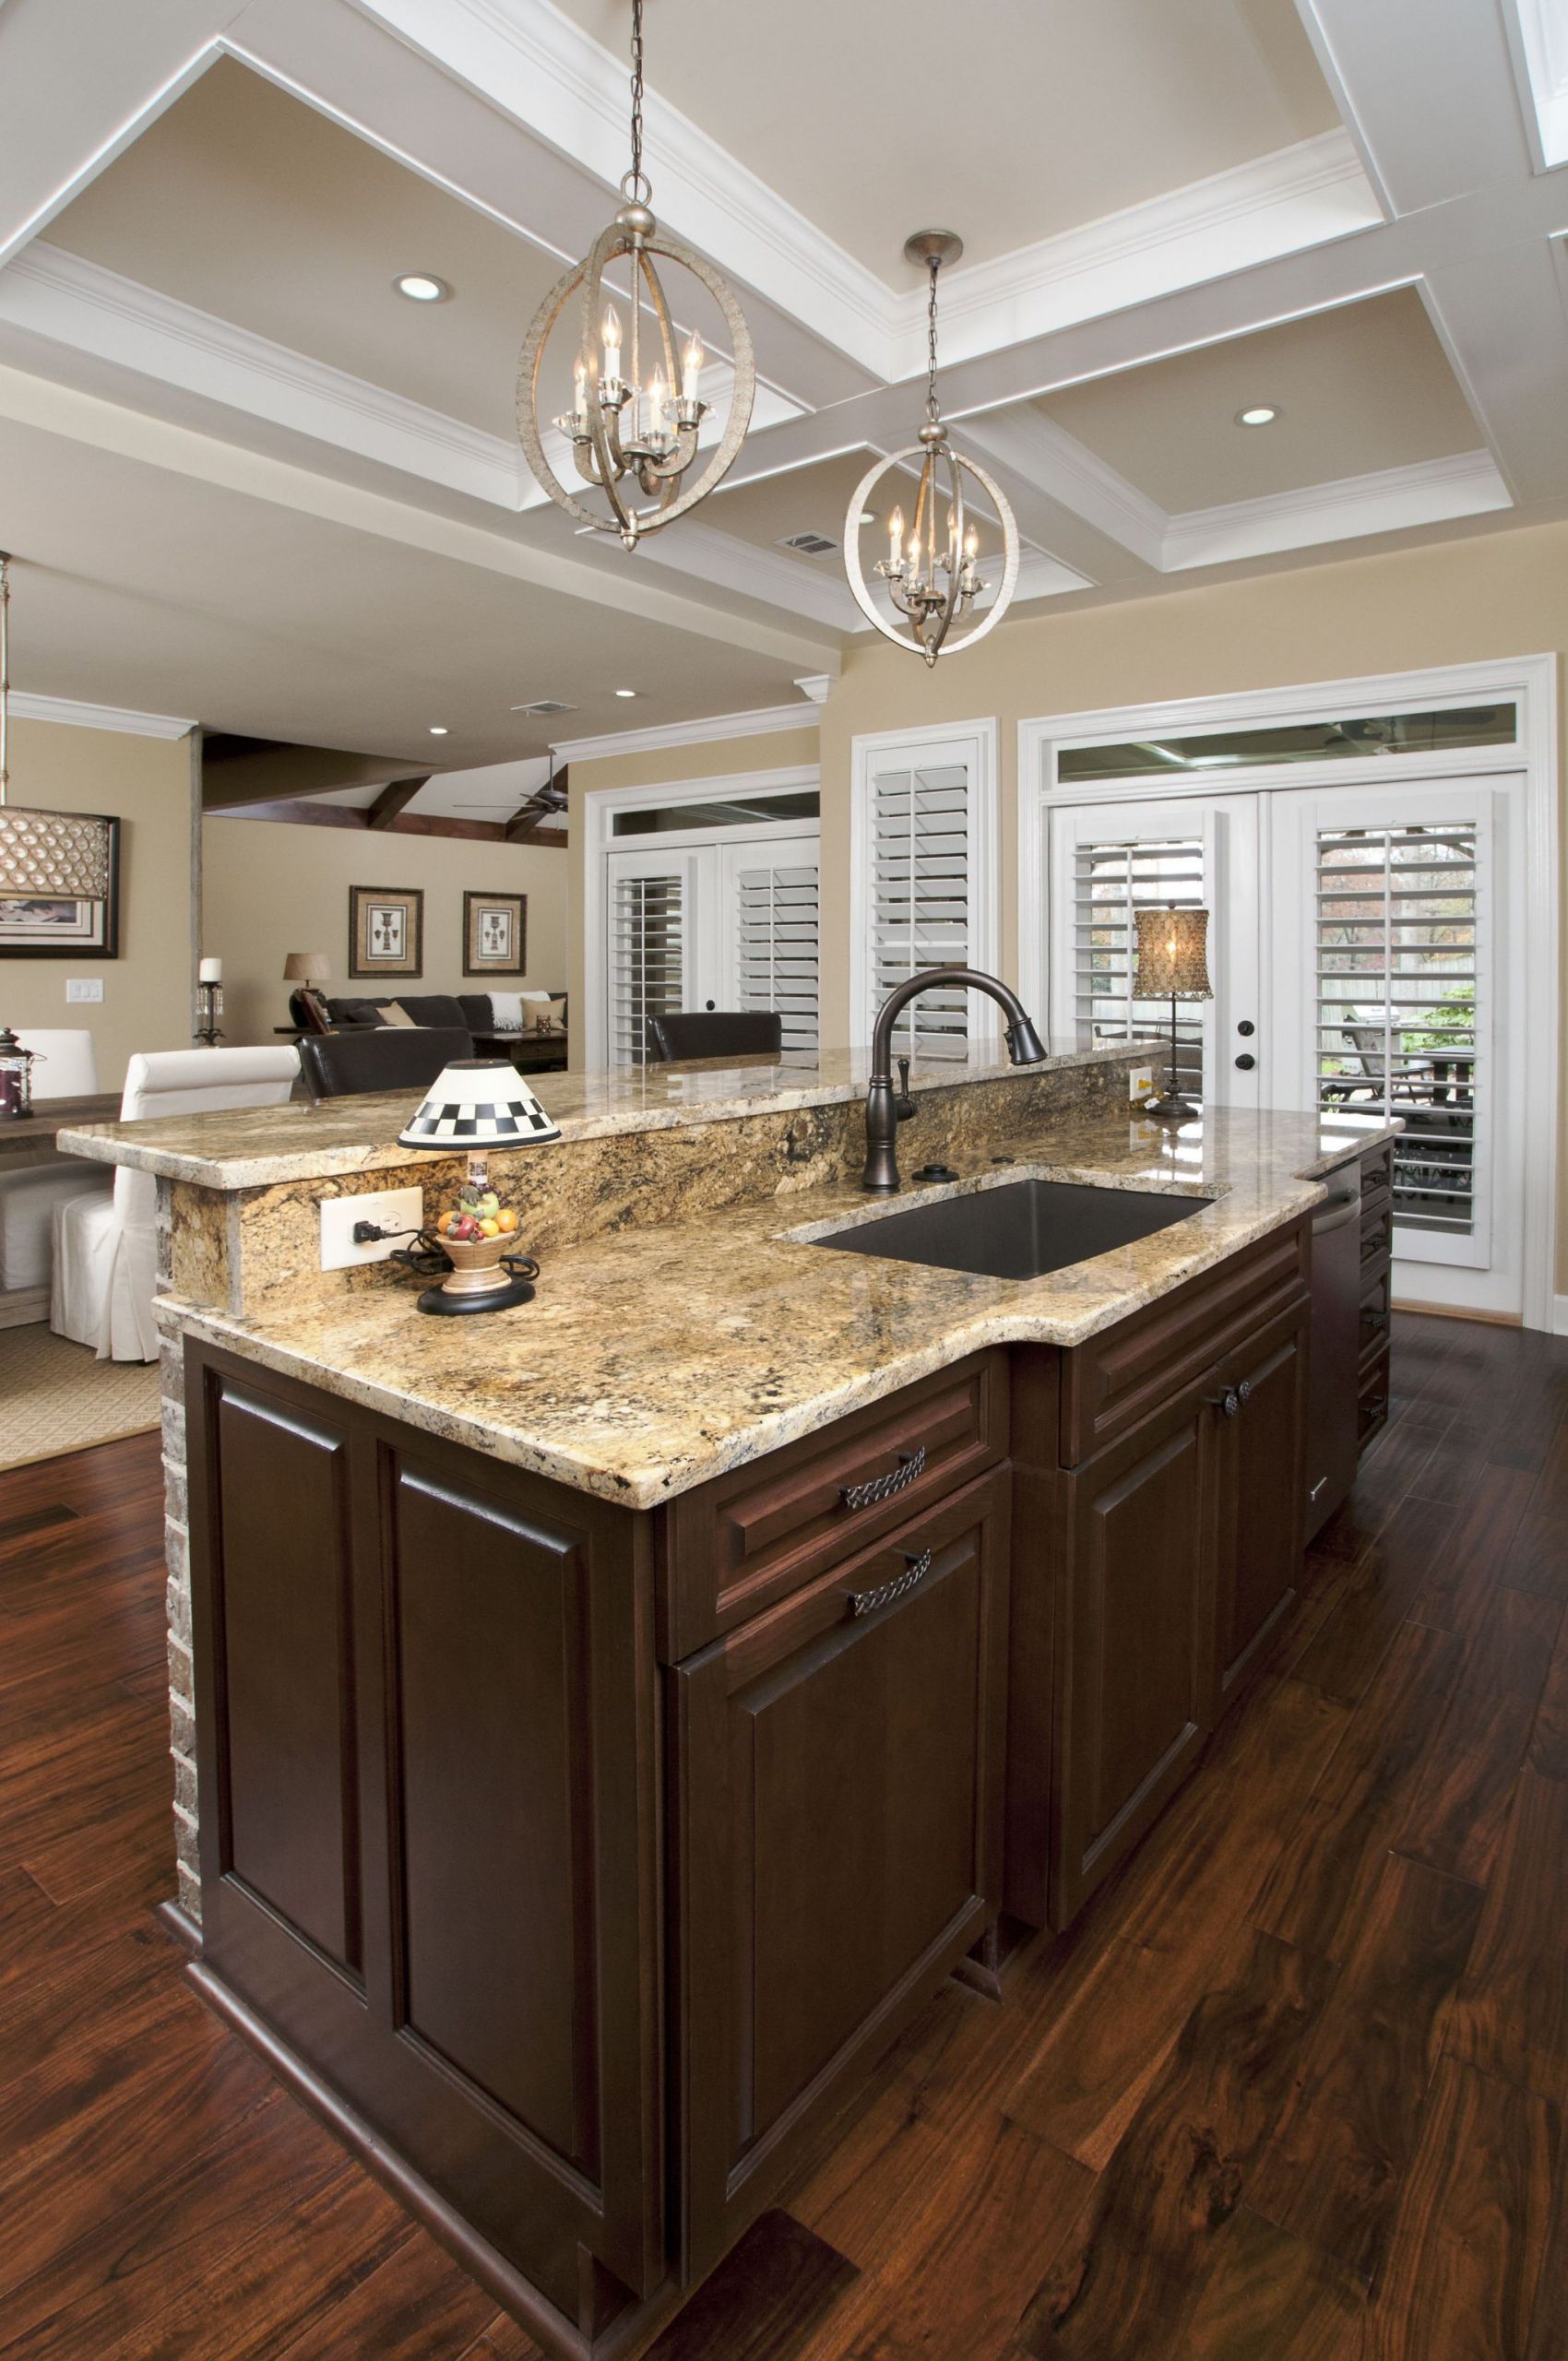 Small Kitchen Island With Sink
 The Possibilities of Storage under Kitchen Islands with